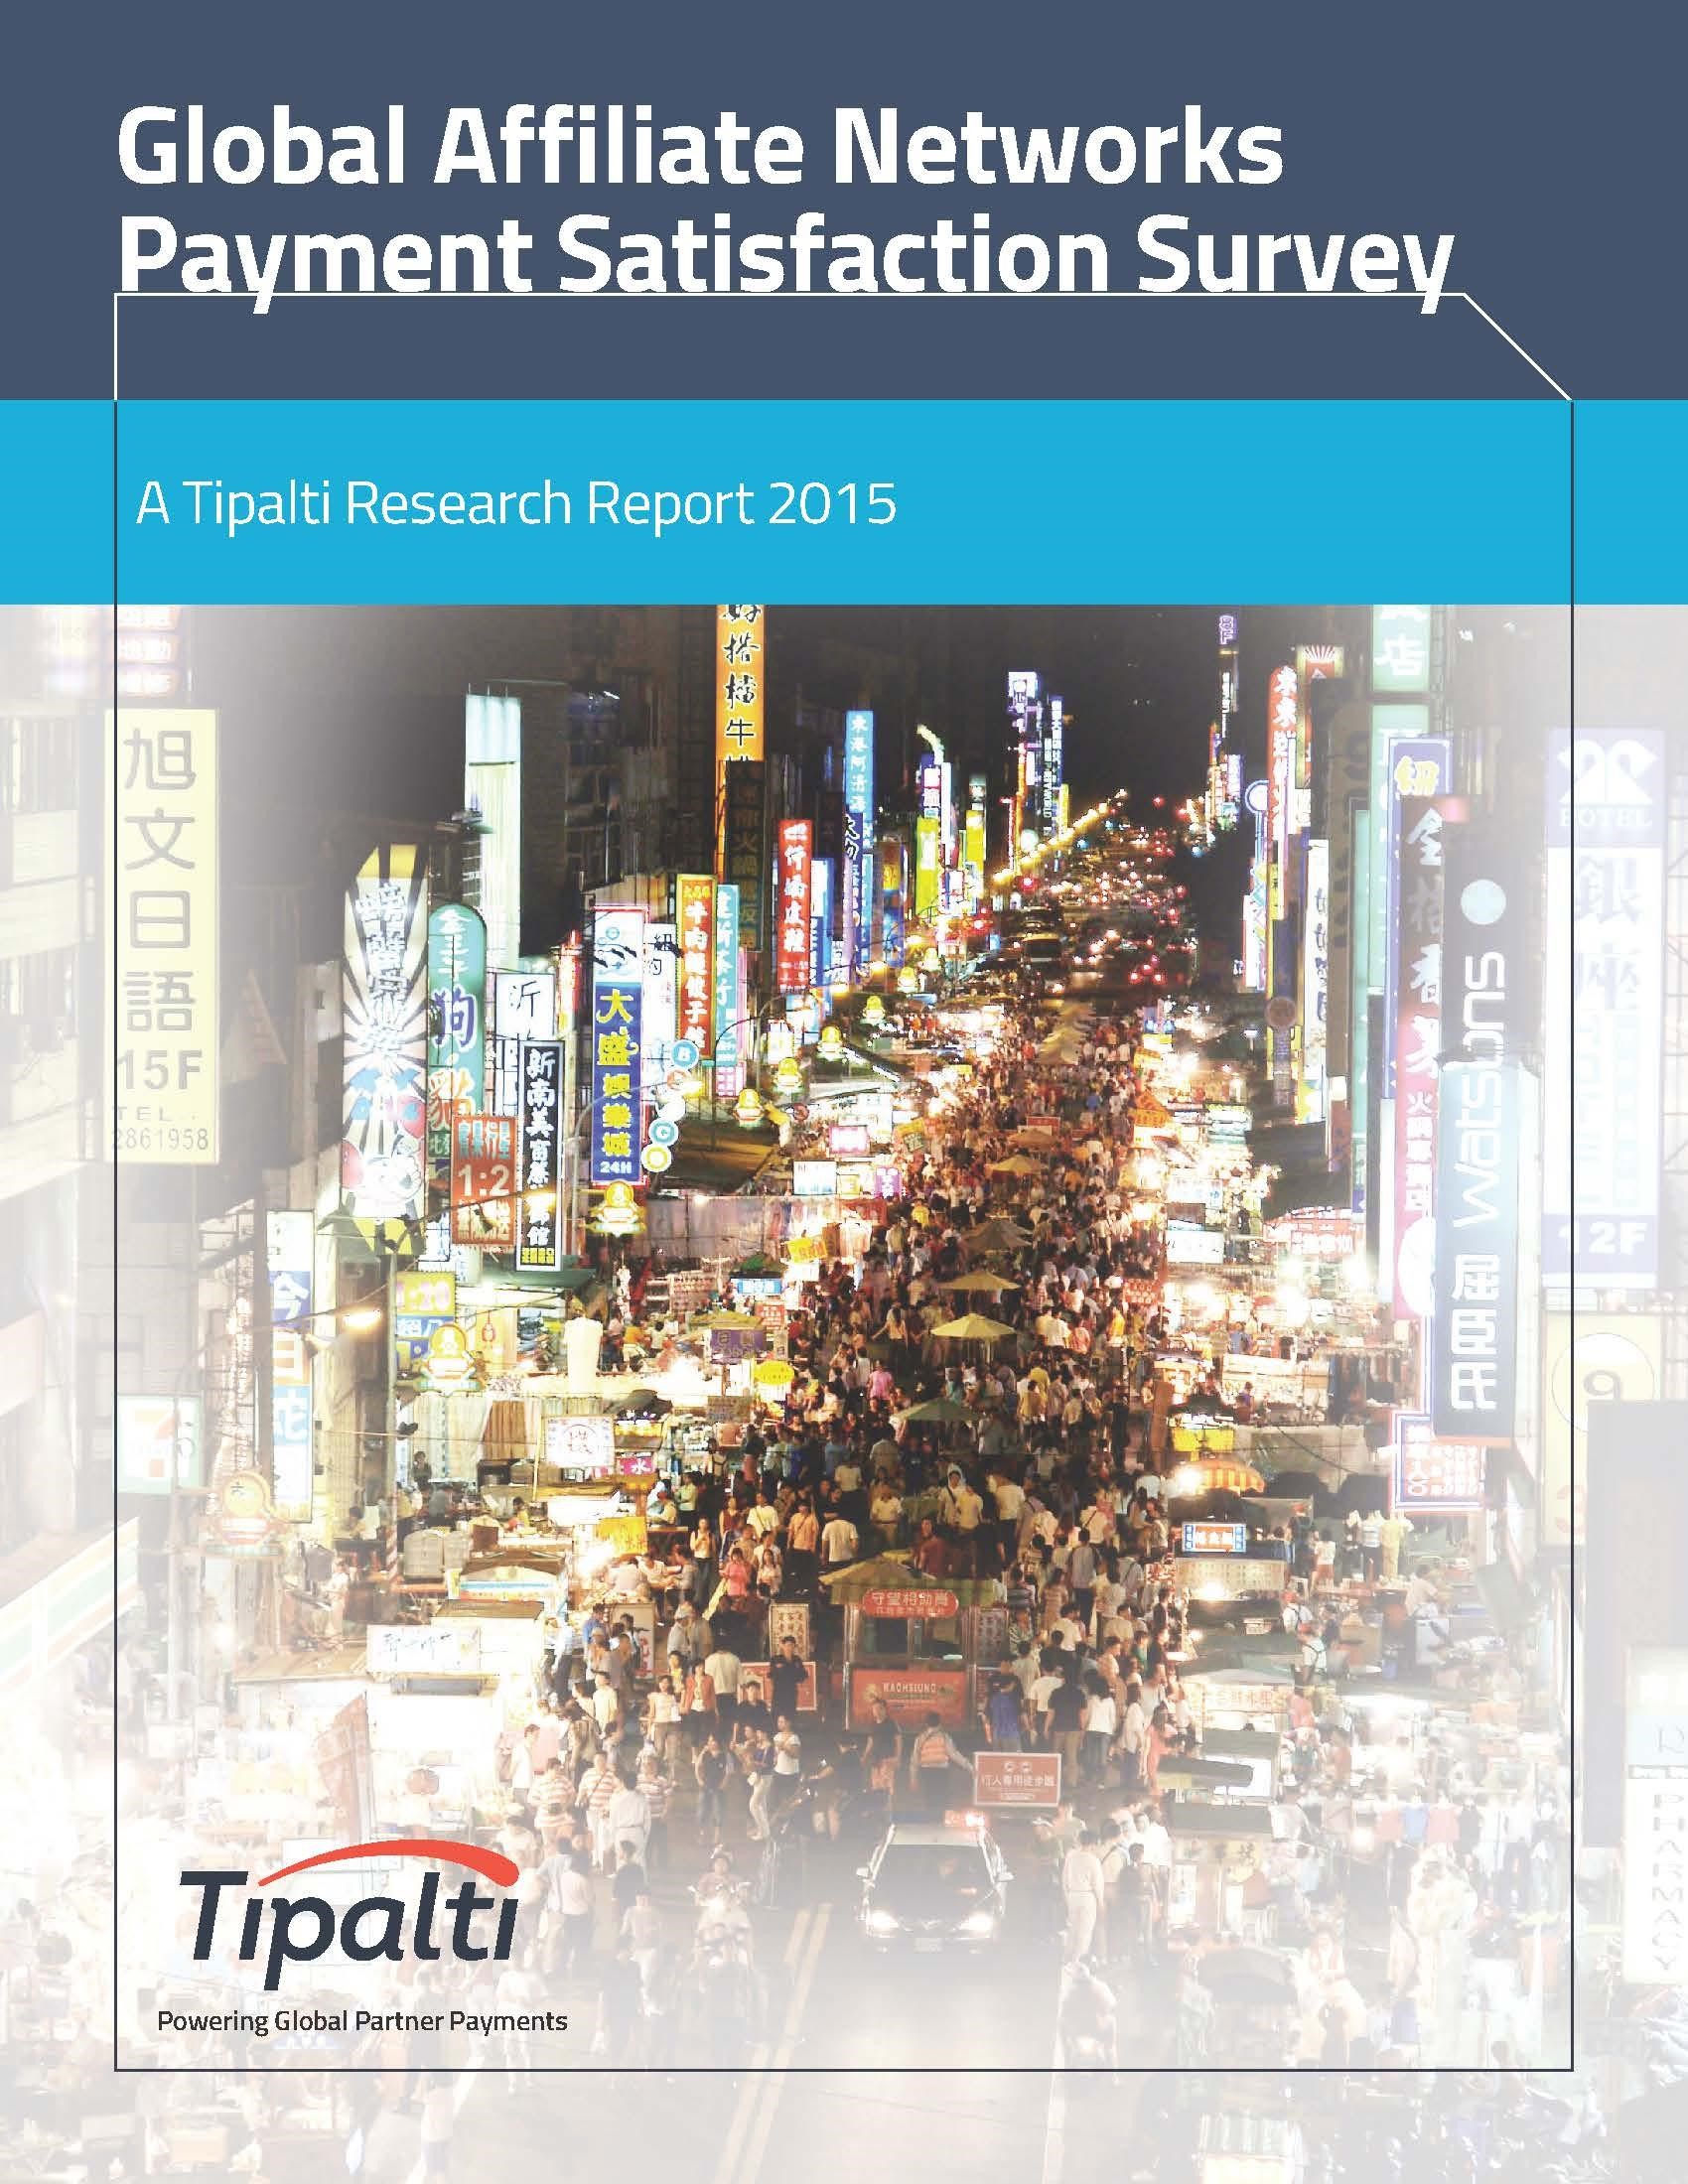 Global Affiliate Networks Payment Satisfaction Survey 2015